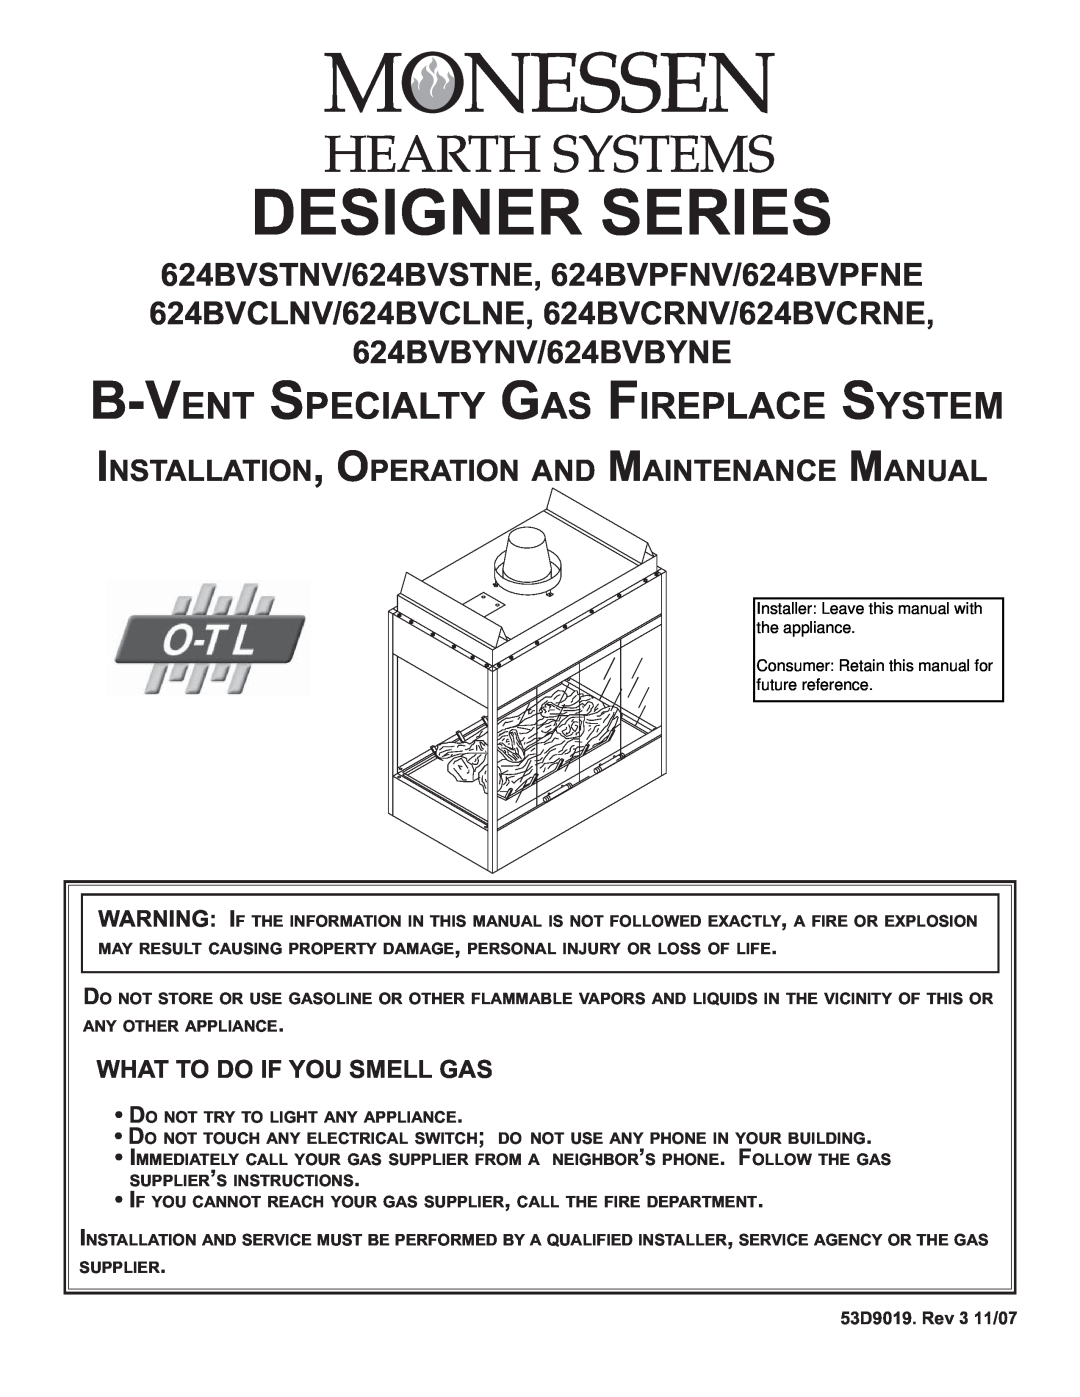 Monessen Hearth DESIGNER SERIES manual What To Do If You Smell Gas, Designer Series, B-Vent Specialty Gas Fireplace System 